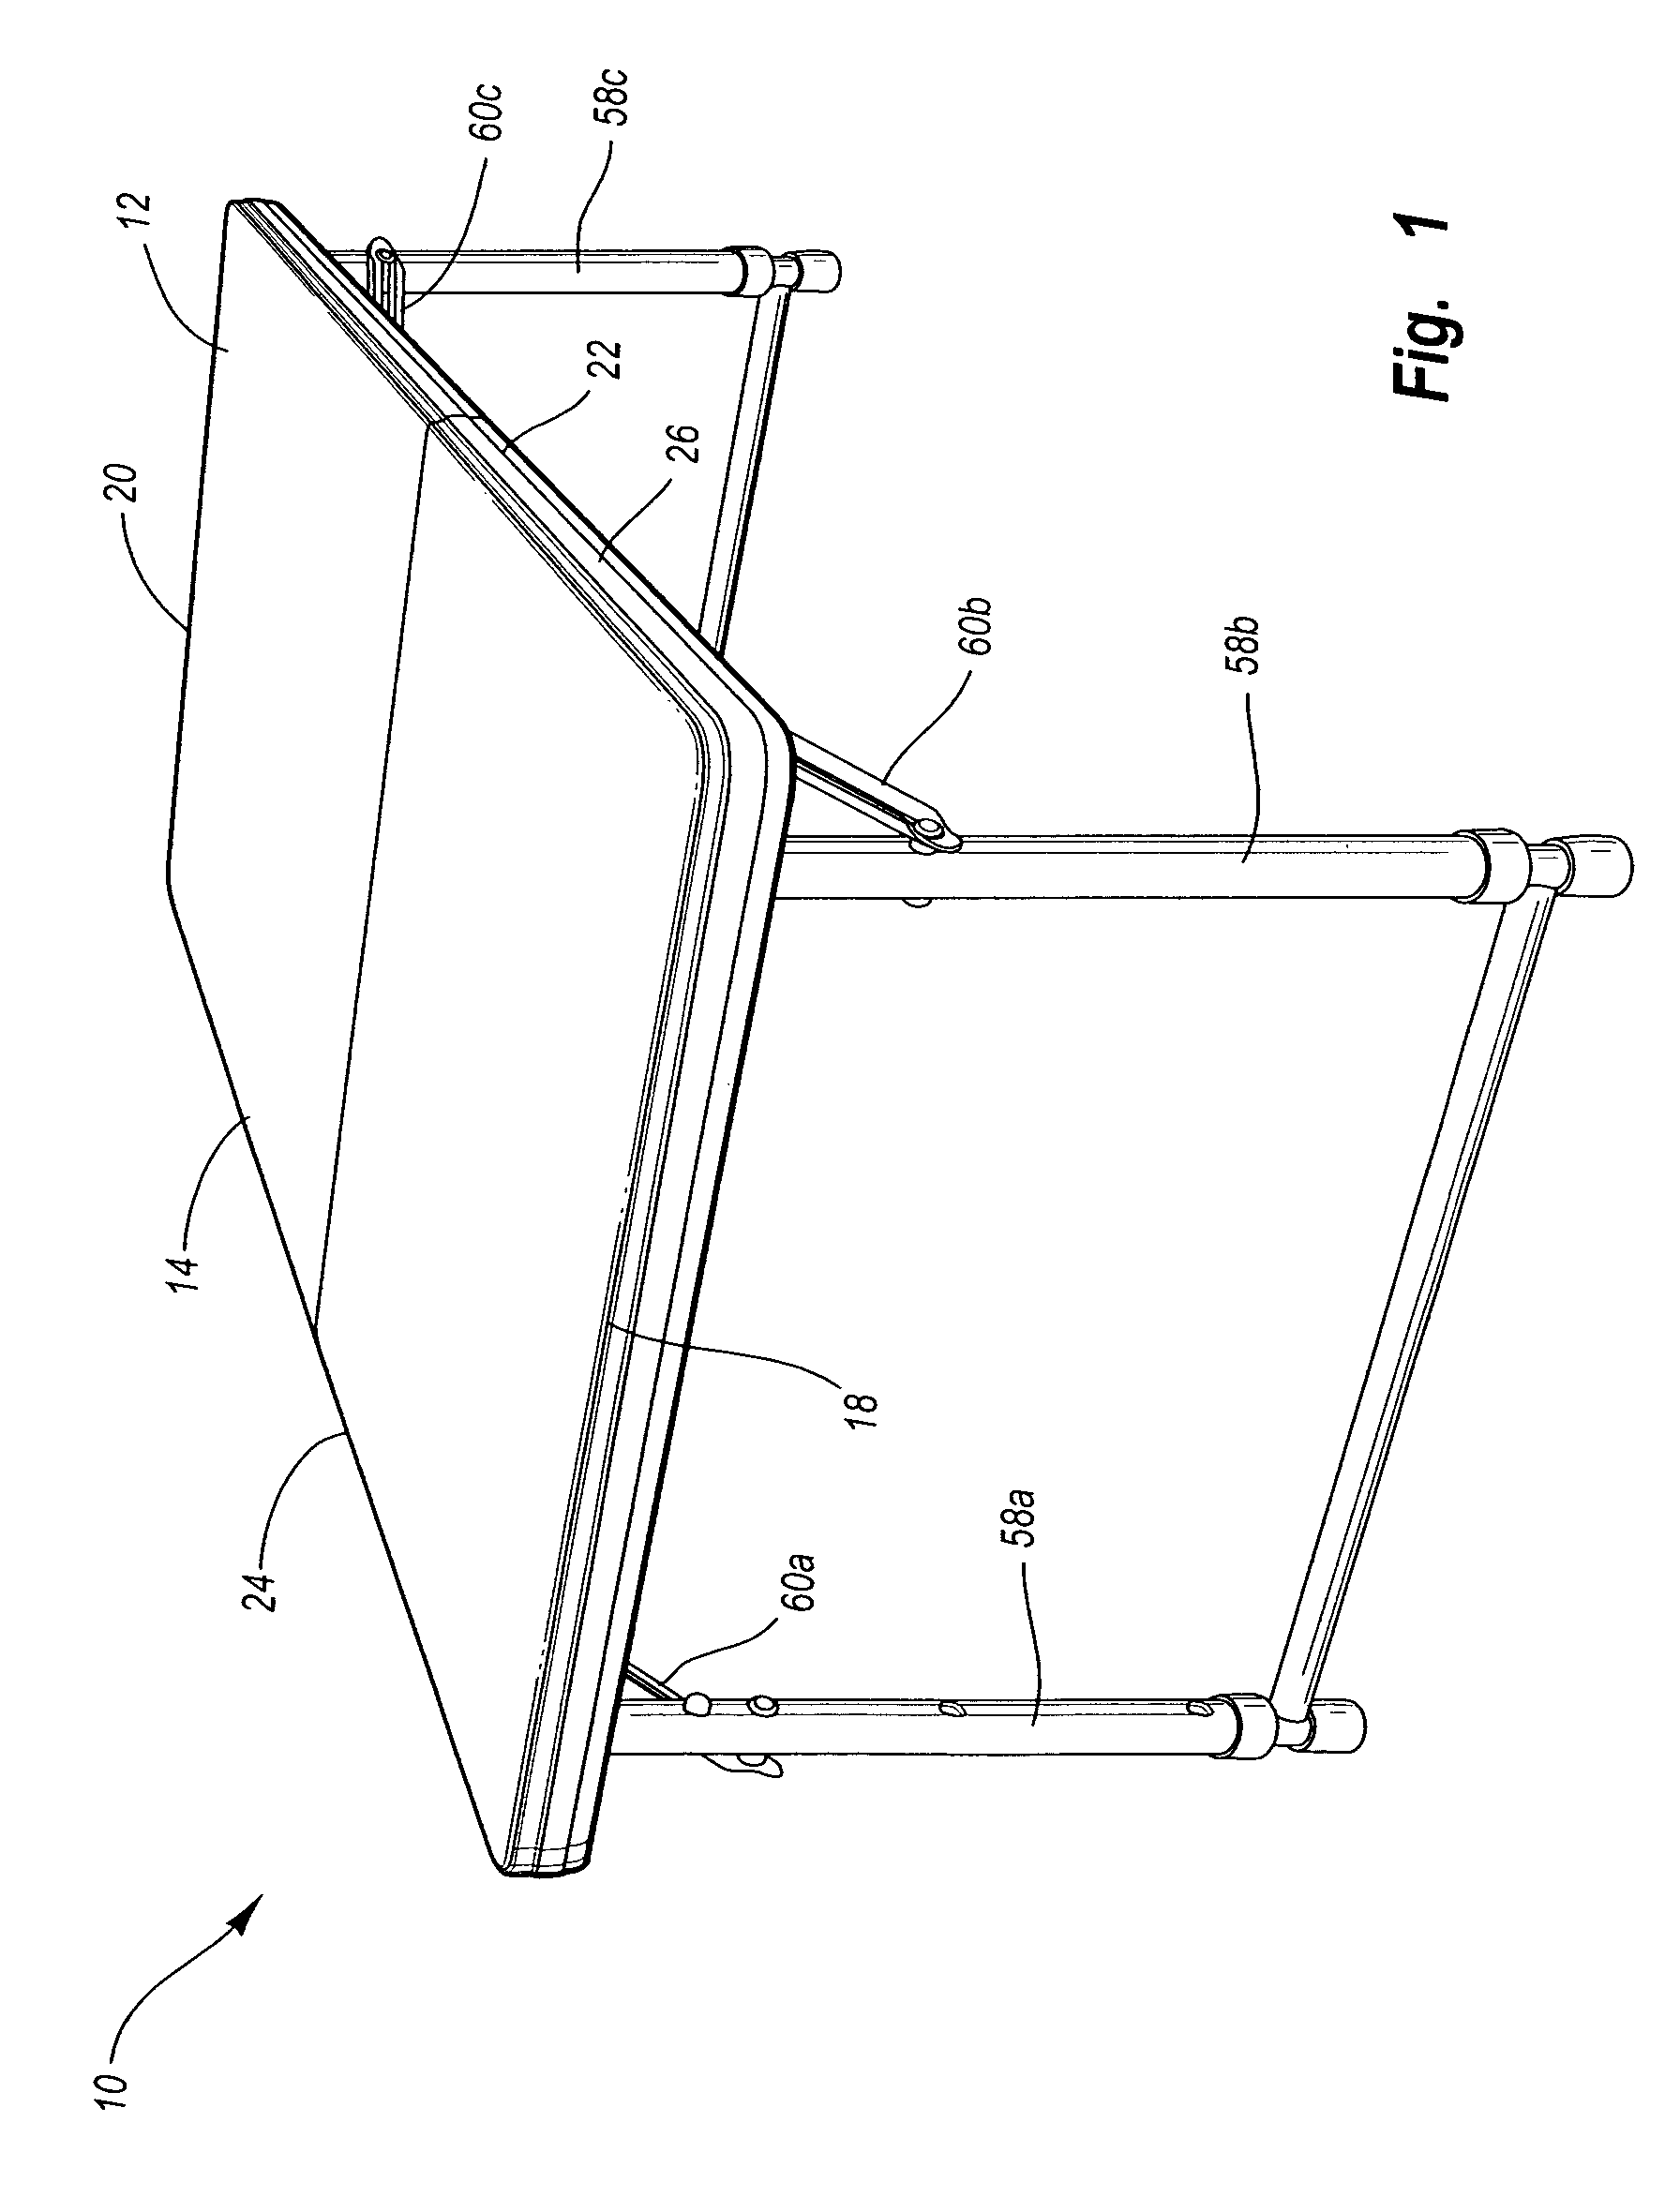 Retainer for securing a table in a folded position